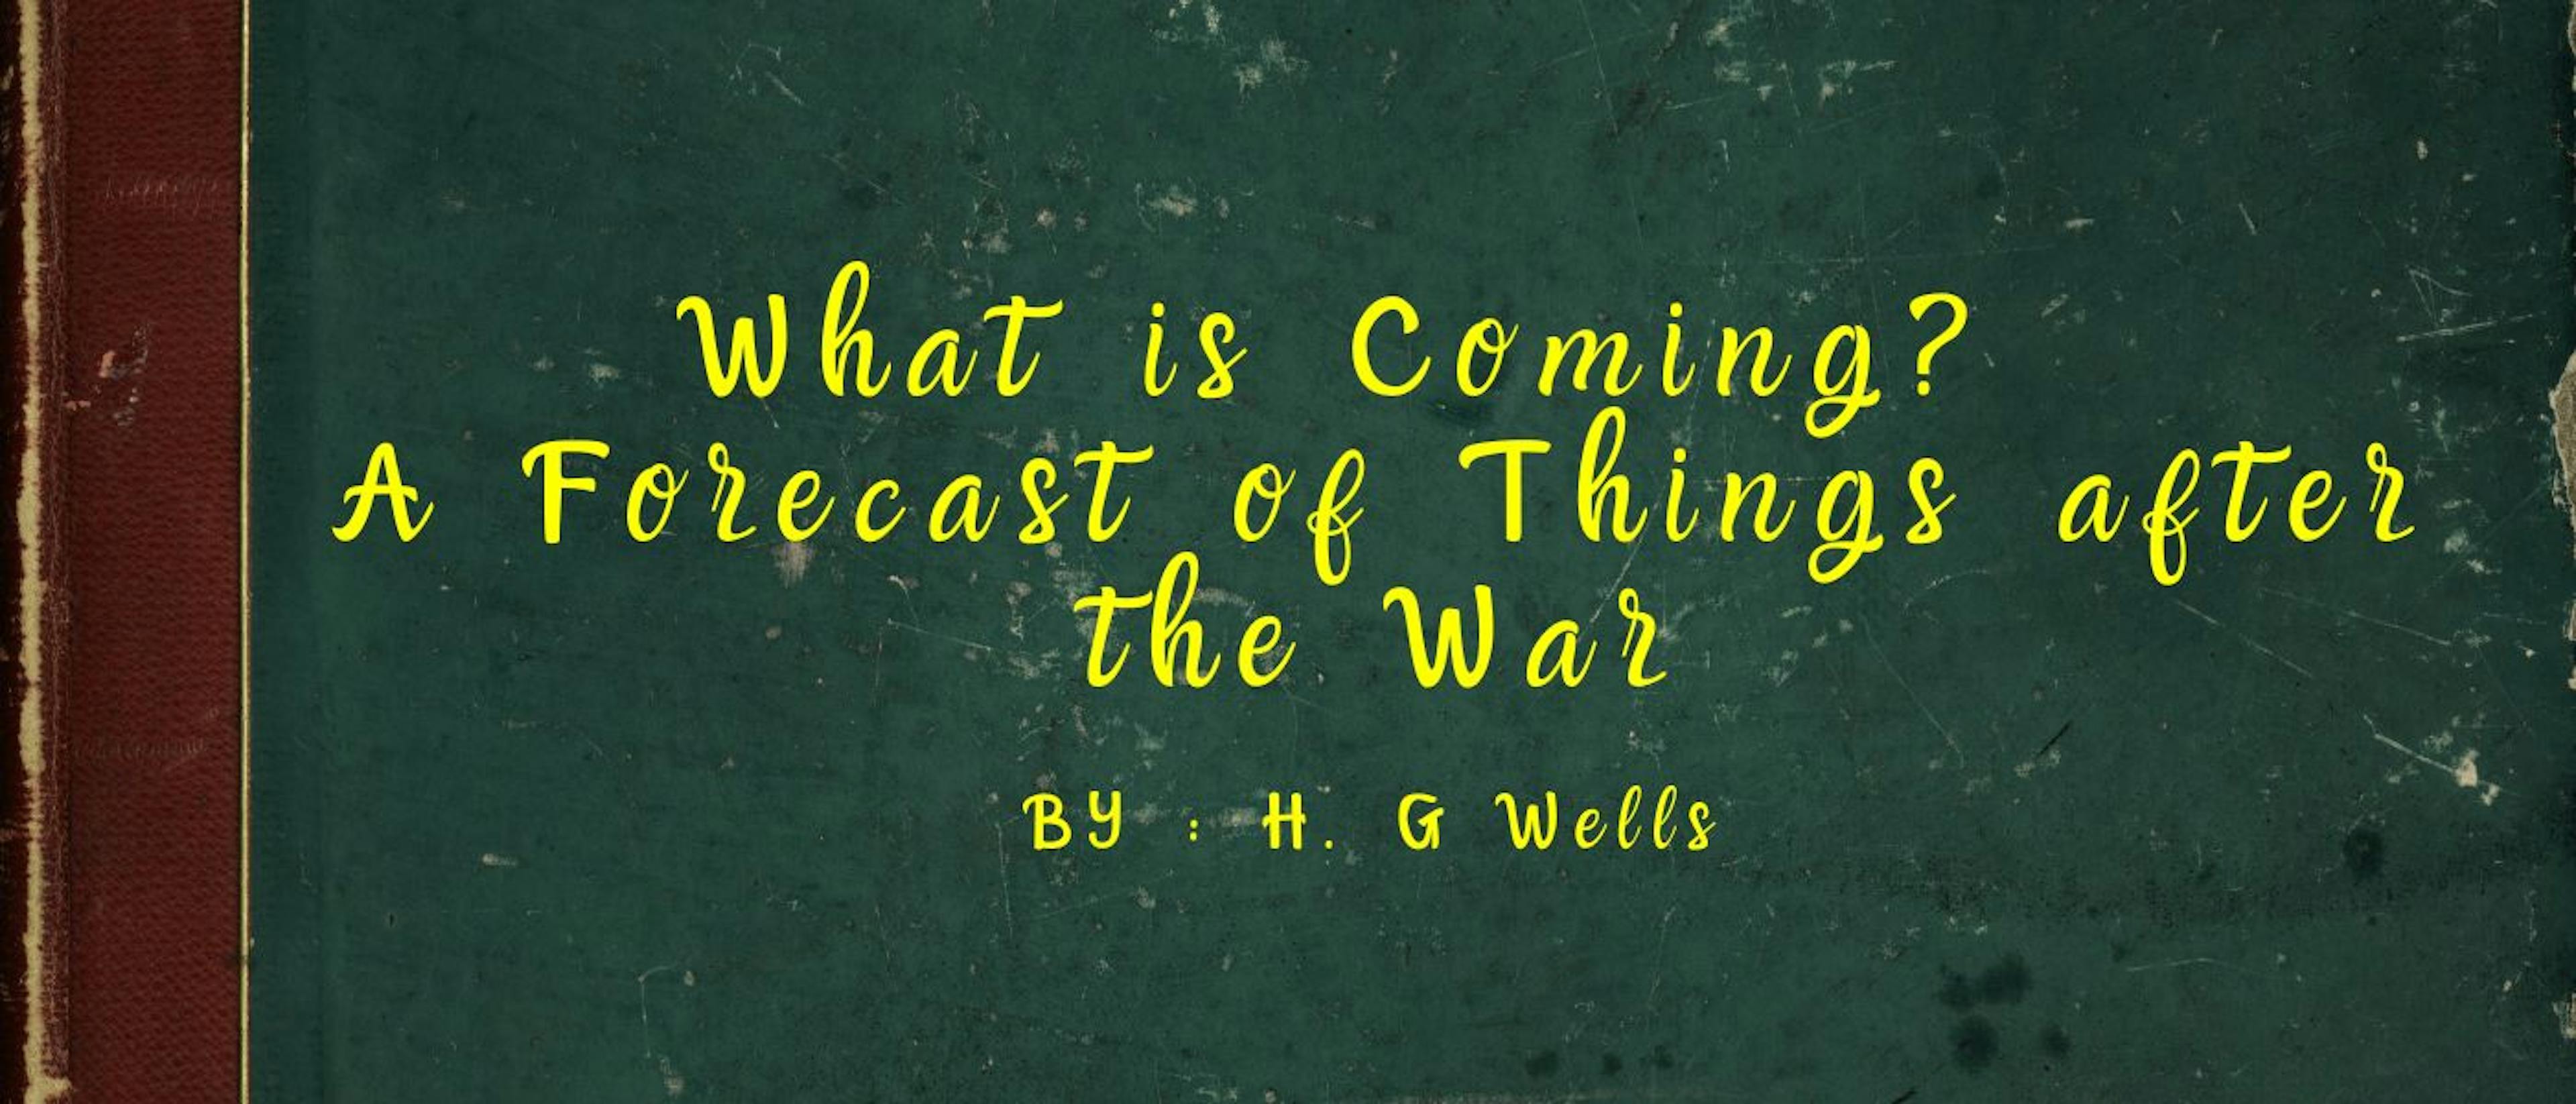 featured image - What is Coming? by H. G. Wells - Table of Links